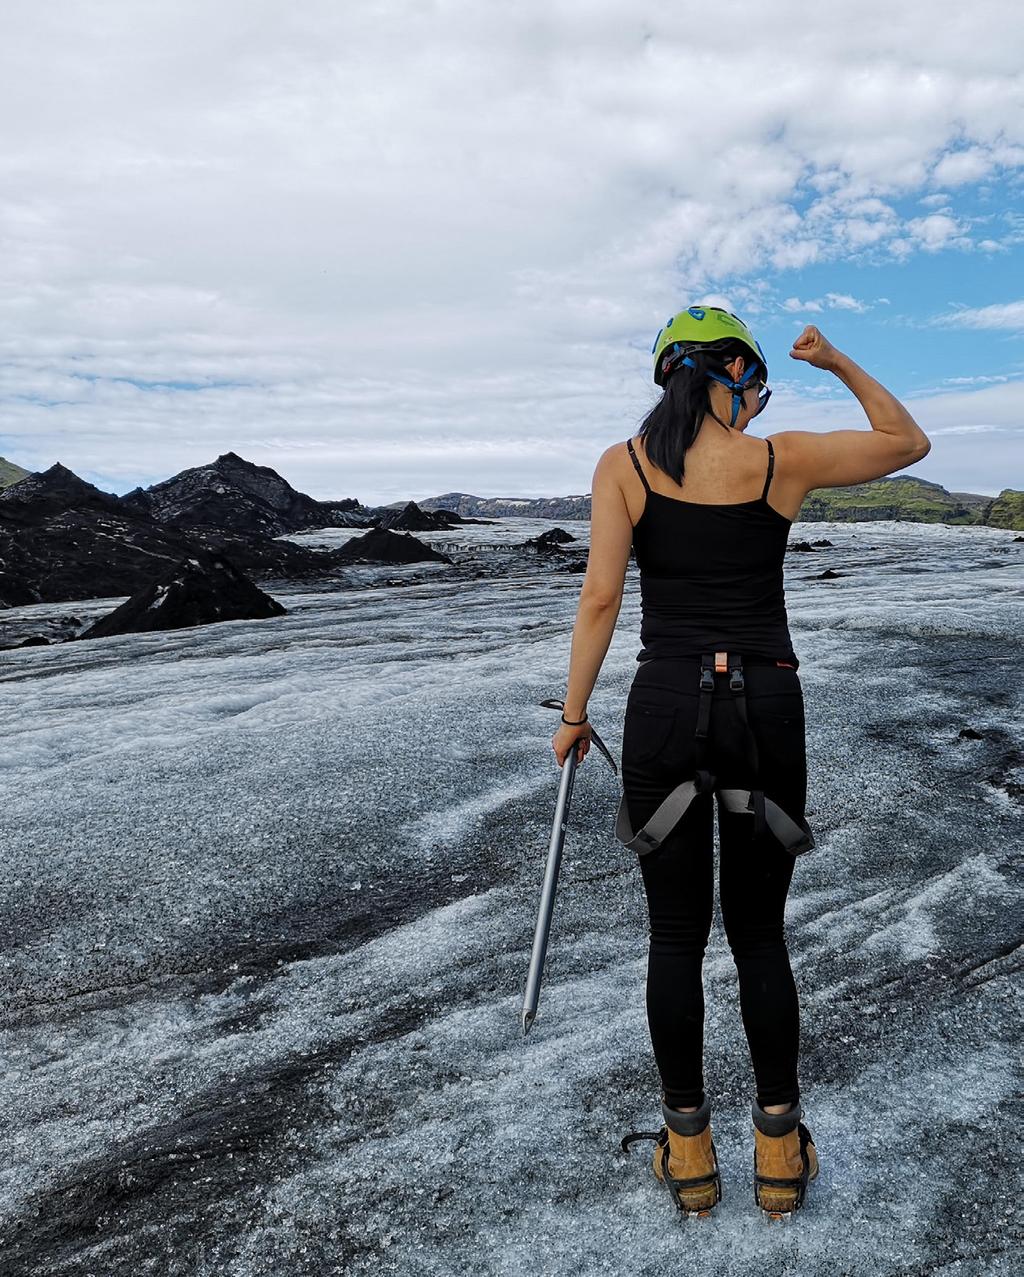 G L AC I ER A DV EN TURES S Ó L HE IMAJÖKULL 3 HO UR GL ACI ER HIKE Exhilarating hiking tour on the Sólheimajökull glacier Get ready for this perfect opportunity for travelers seeking to mesh